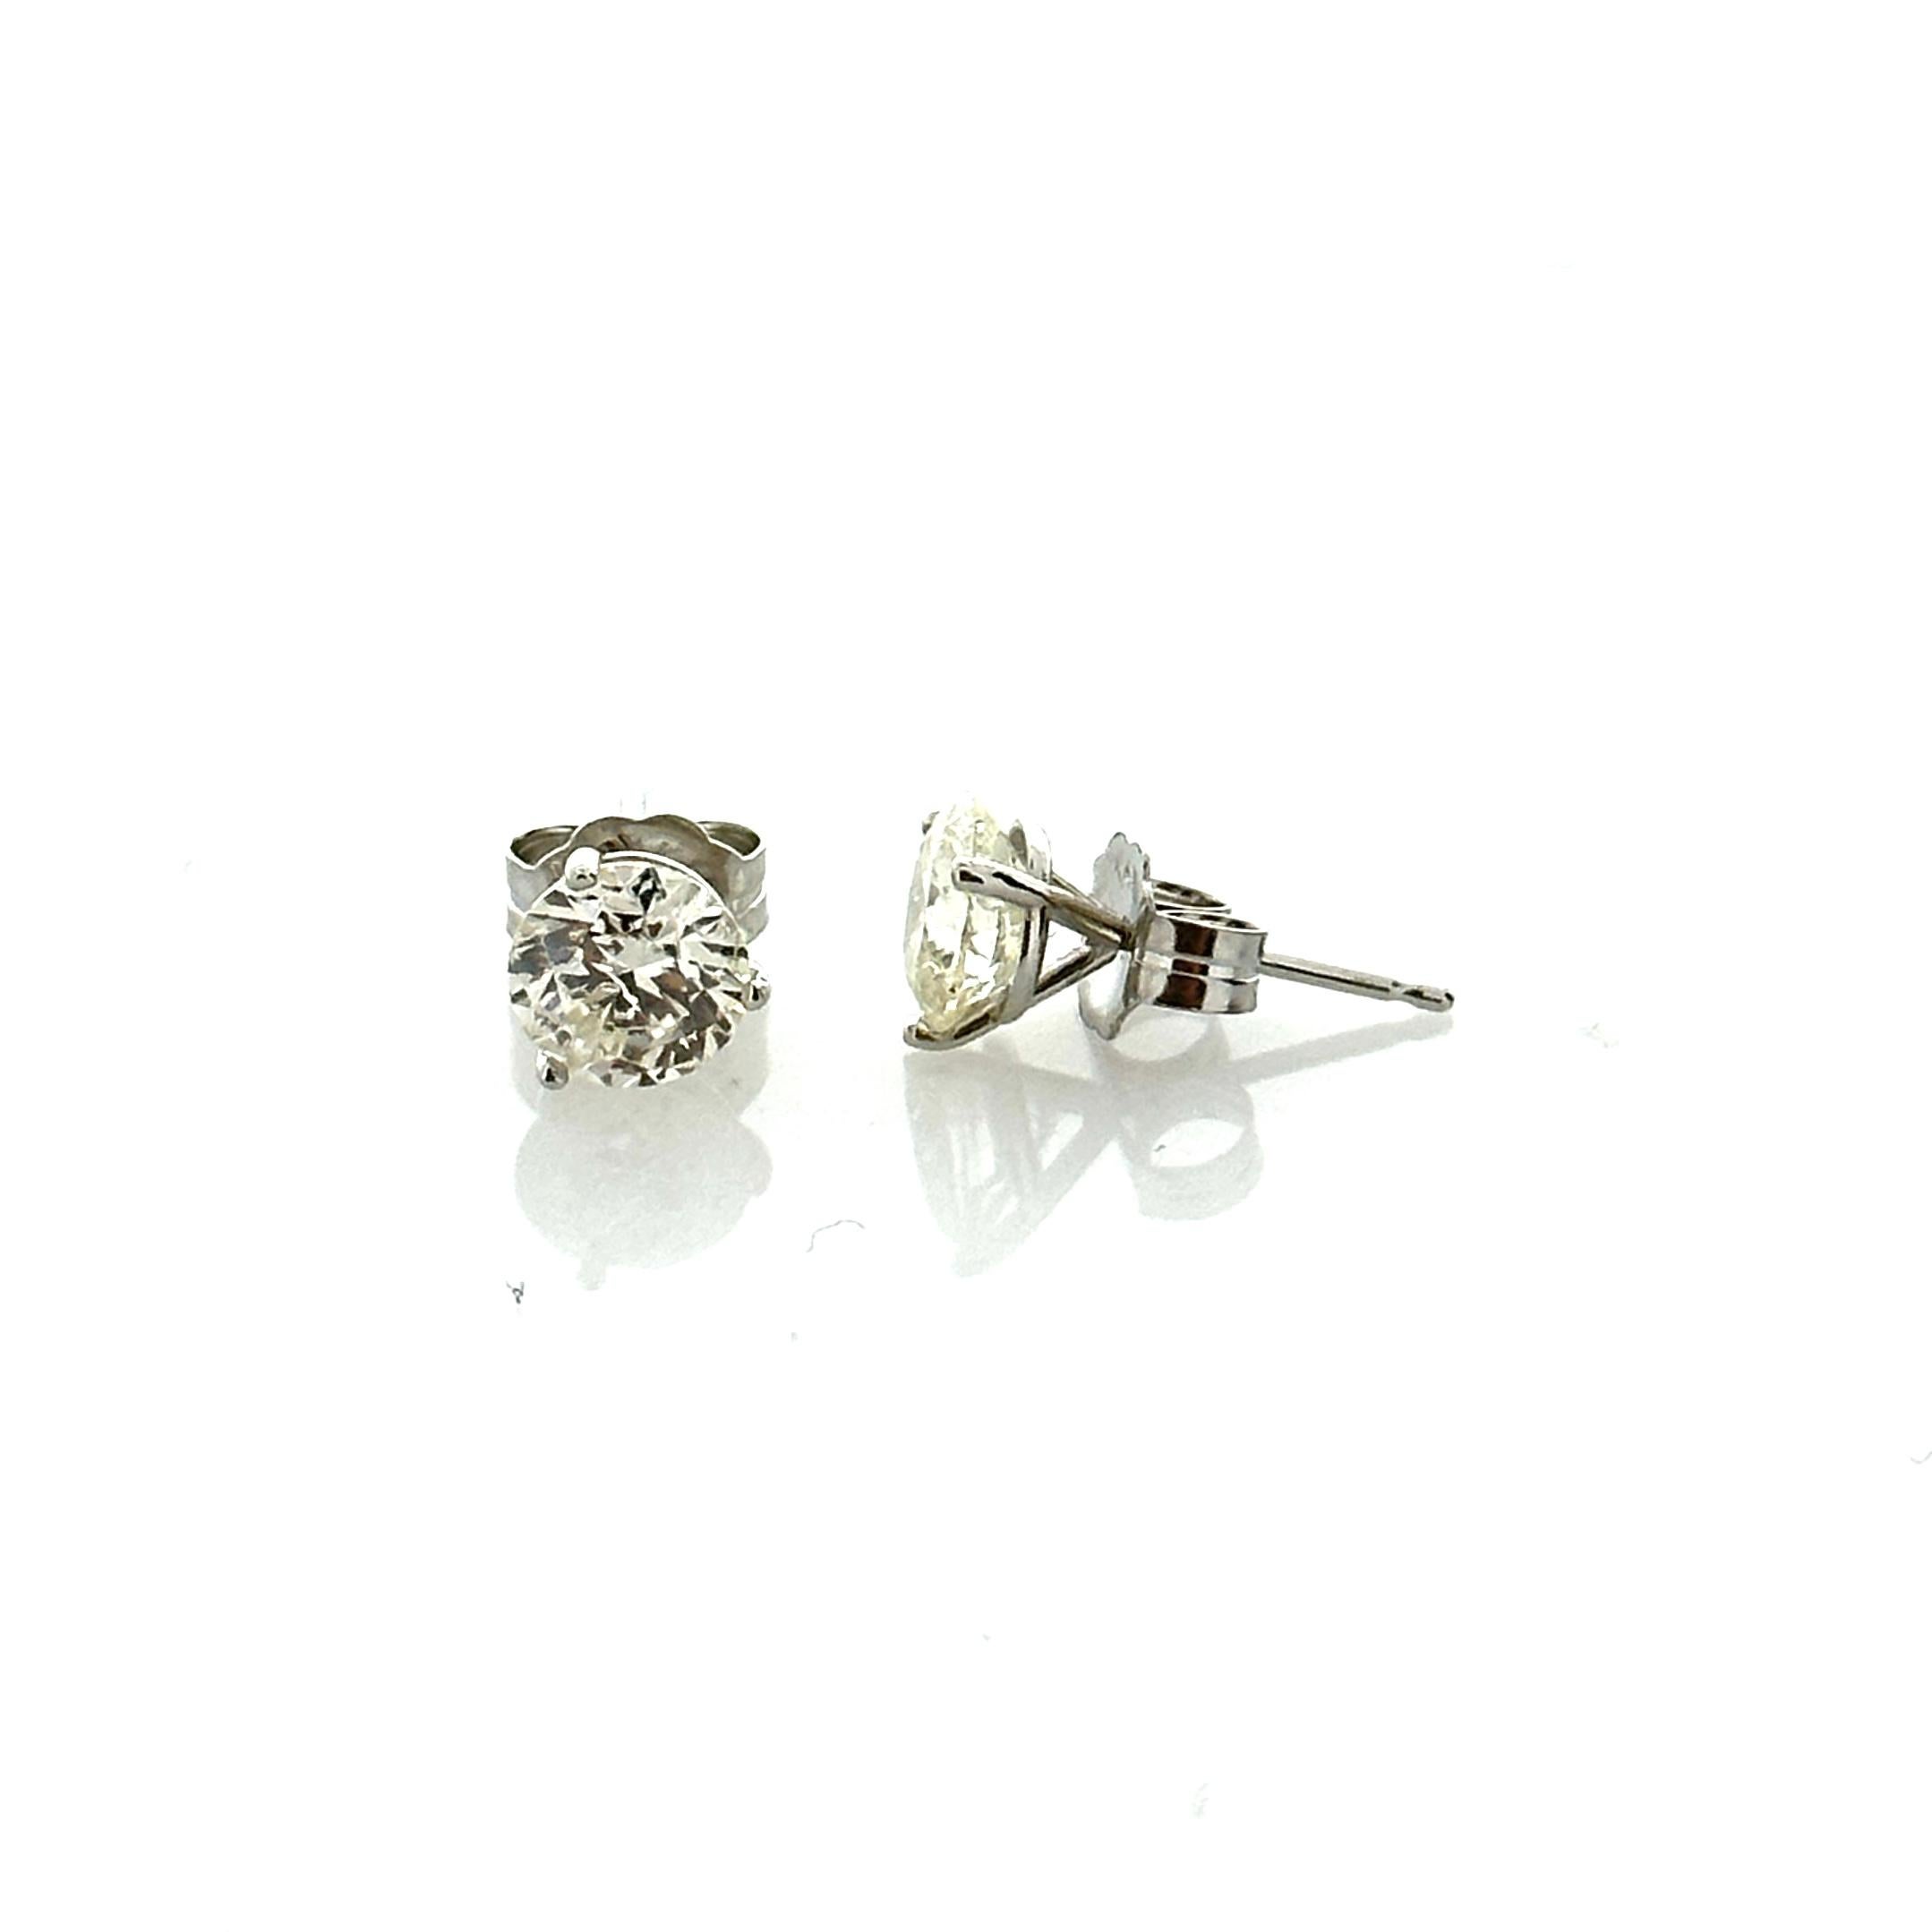 Stunning 14 Karat white gold handmade earrings featuring 2 round brilliant cut diamonds weighing 2.00 carat total I-J color and SI1 clarity. These gorgeous earrings are classic and timelessly elegant.